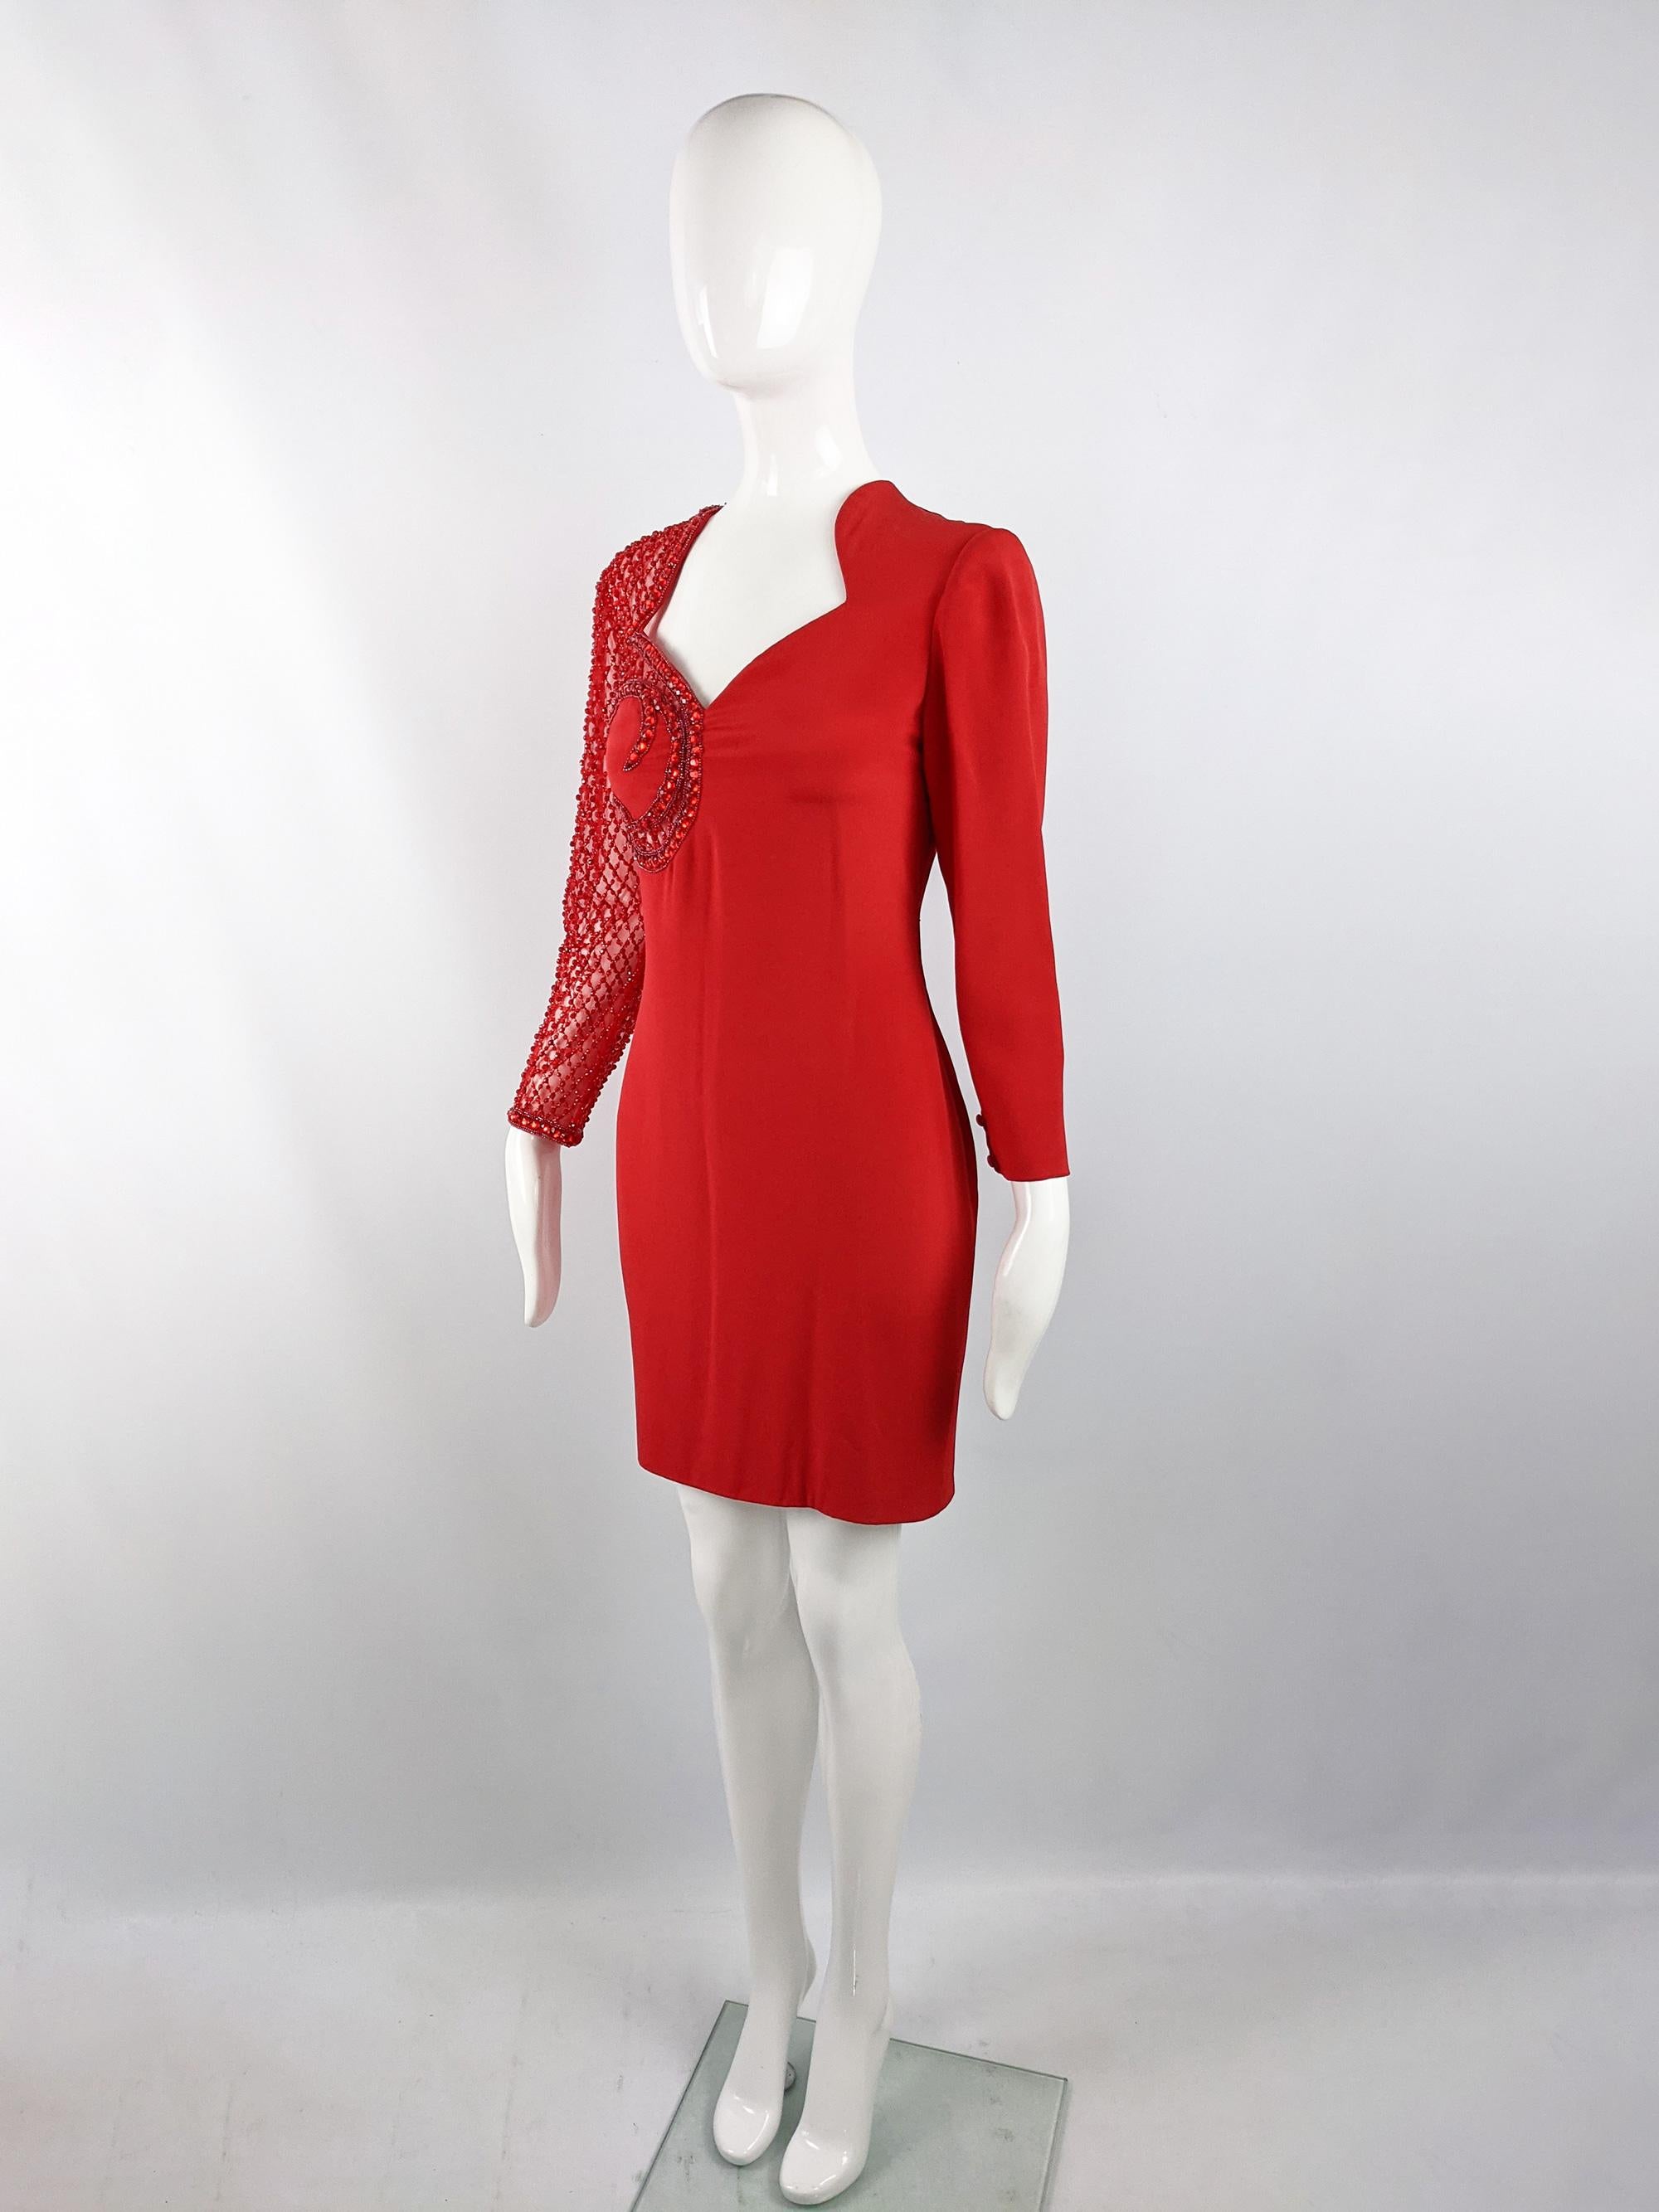 Renato Balestra Vintage Italian Couture Red Beaded Sheer Sleeve Party Dress In Good Condition For Sale In Doncaster, South Yorkshire